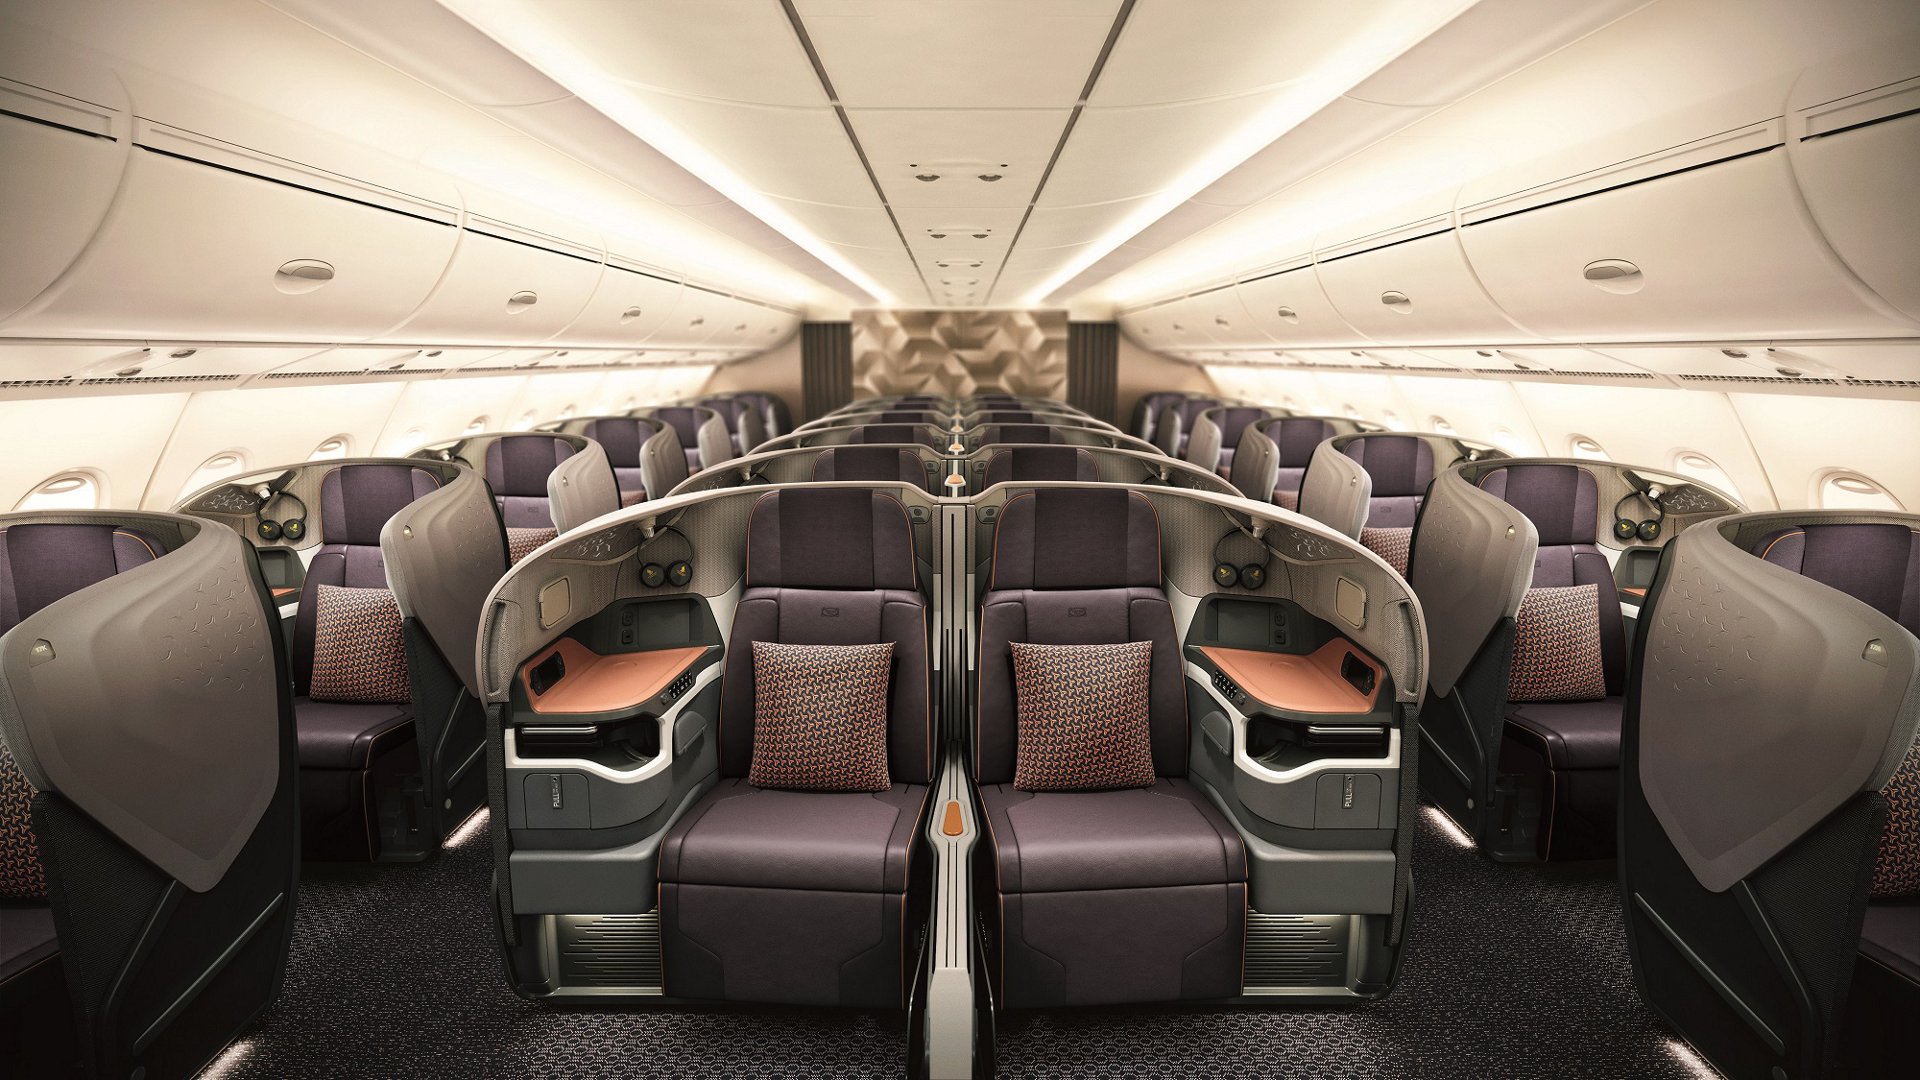 Sia Engineering Company And Airbus Complete First Cabin